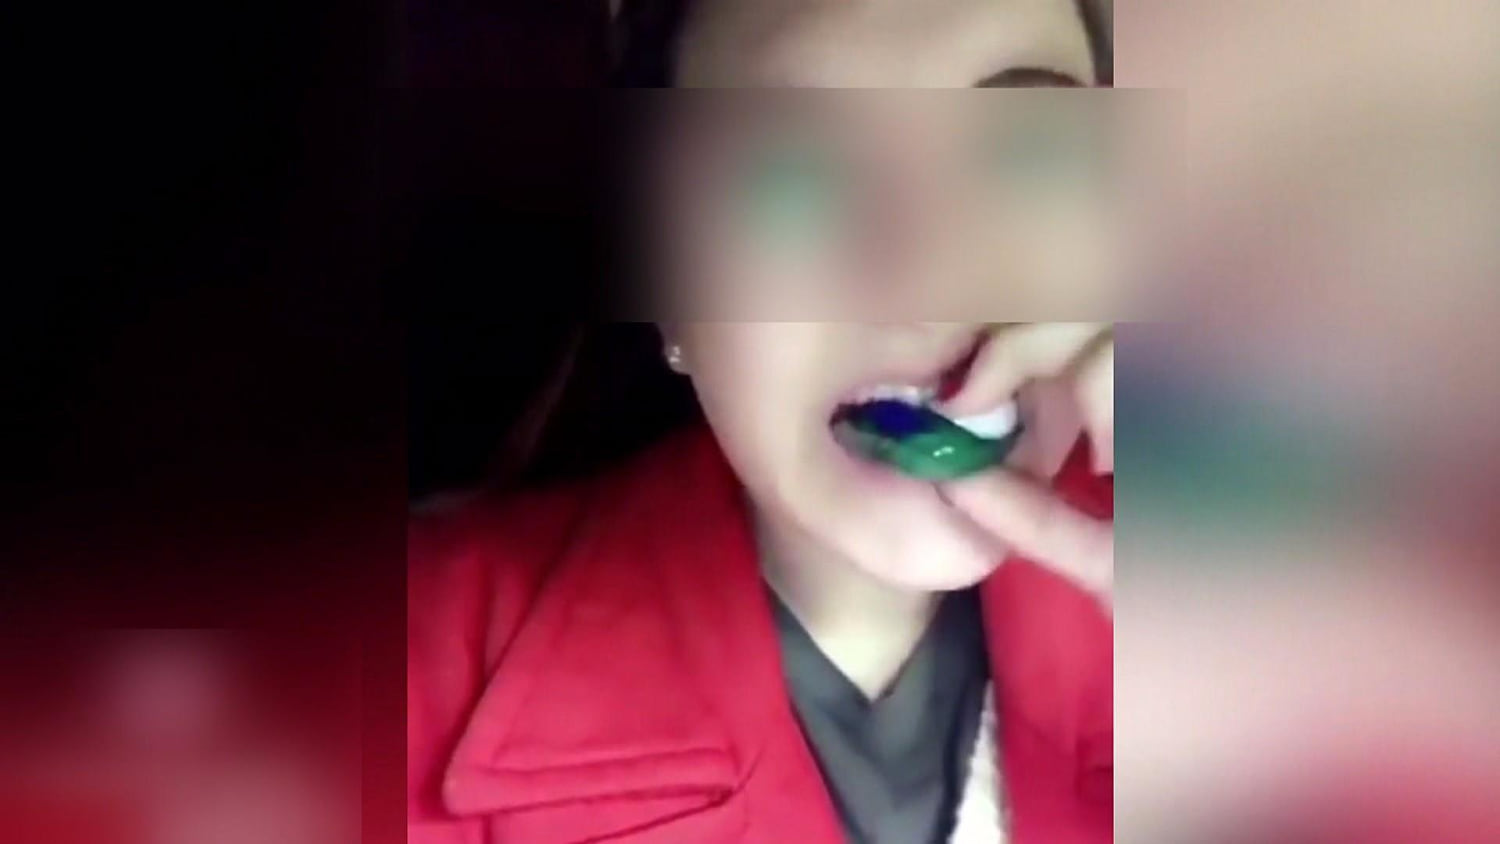 The Tide Pod Challenge has people eating laundry detergent pods